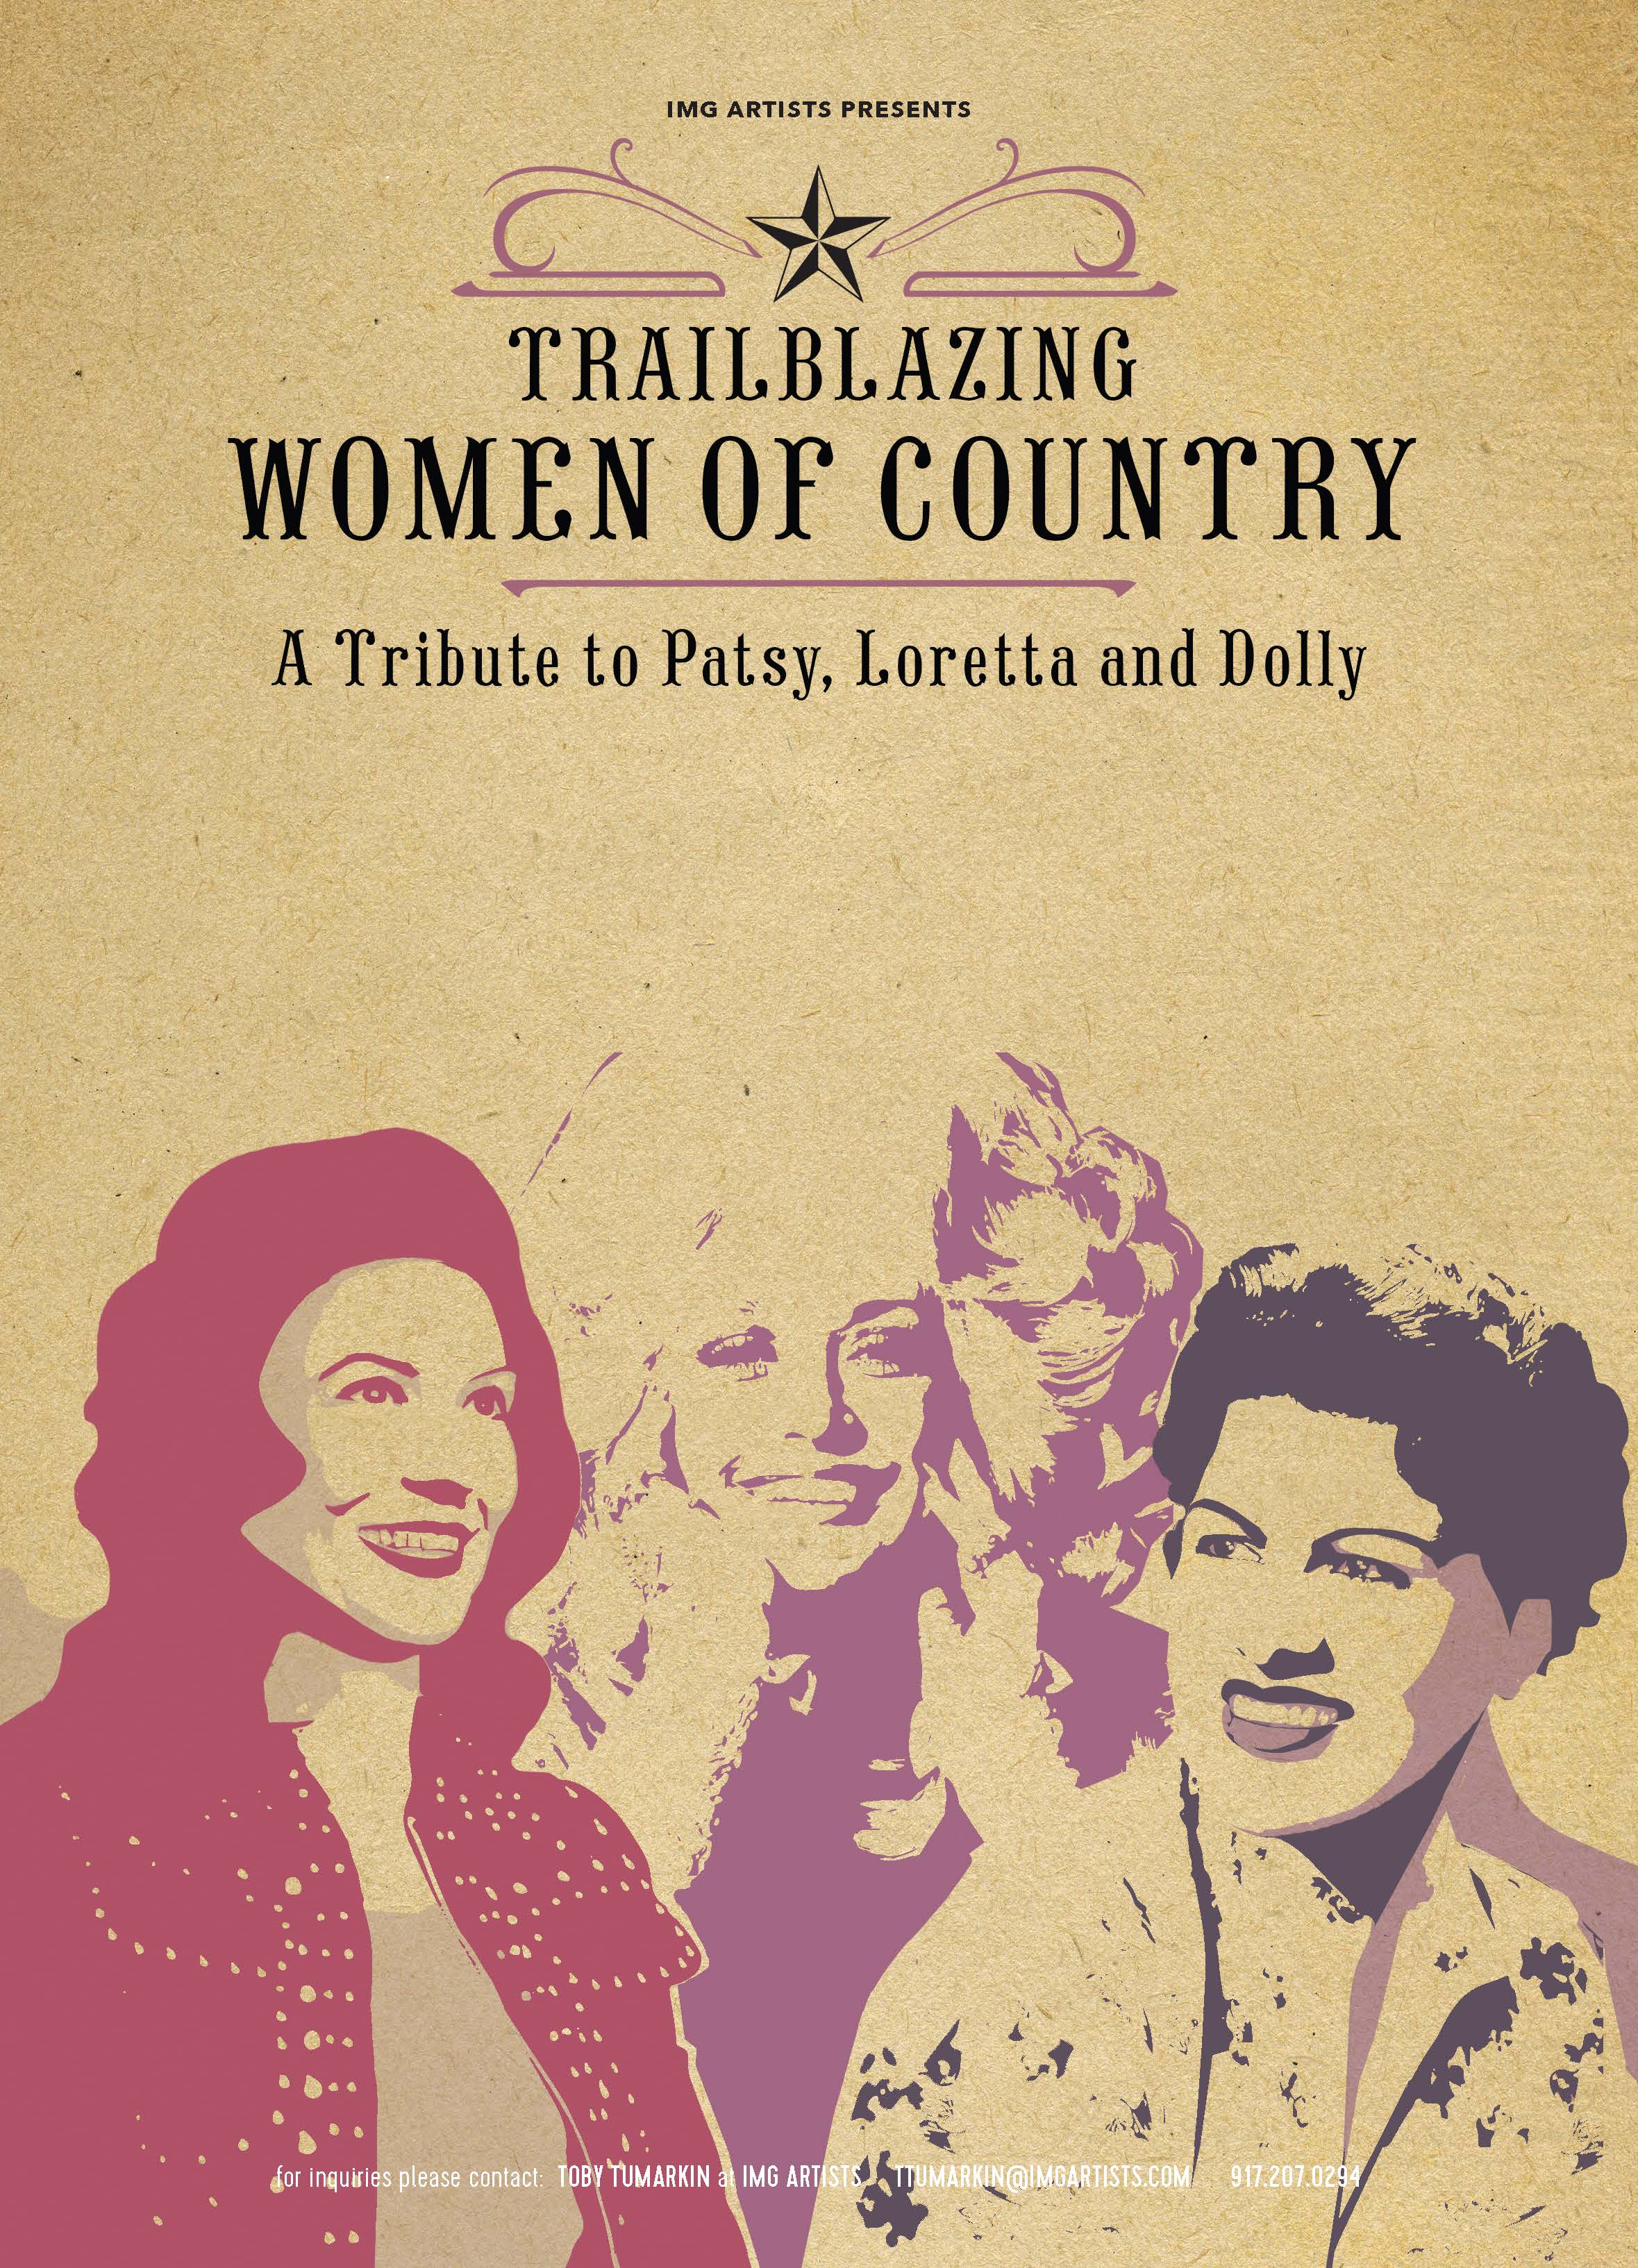 Poster with Loretta Lynn, Dolly Parton, and Patsy Kline in cartoon drawings. 